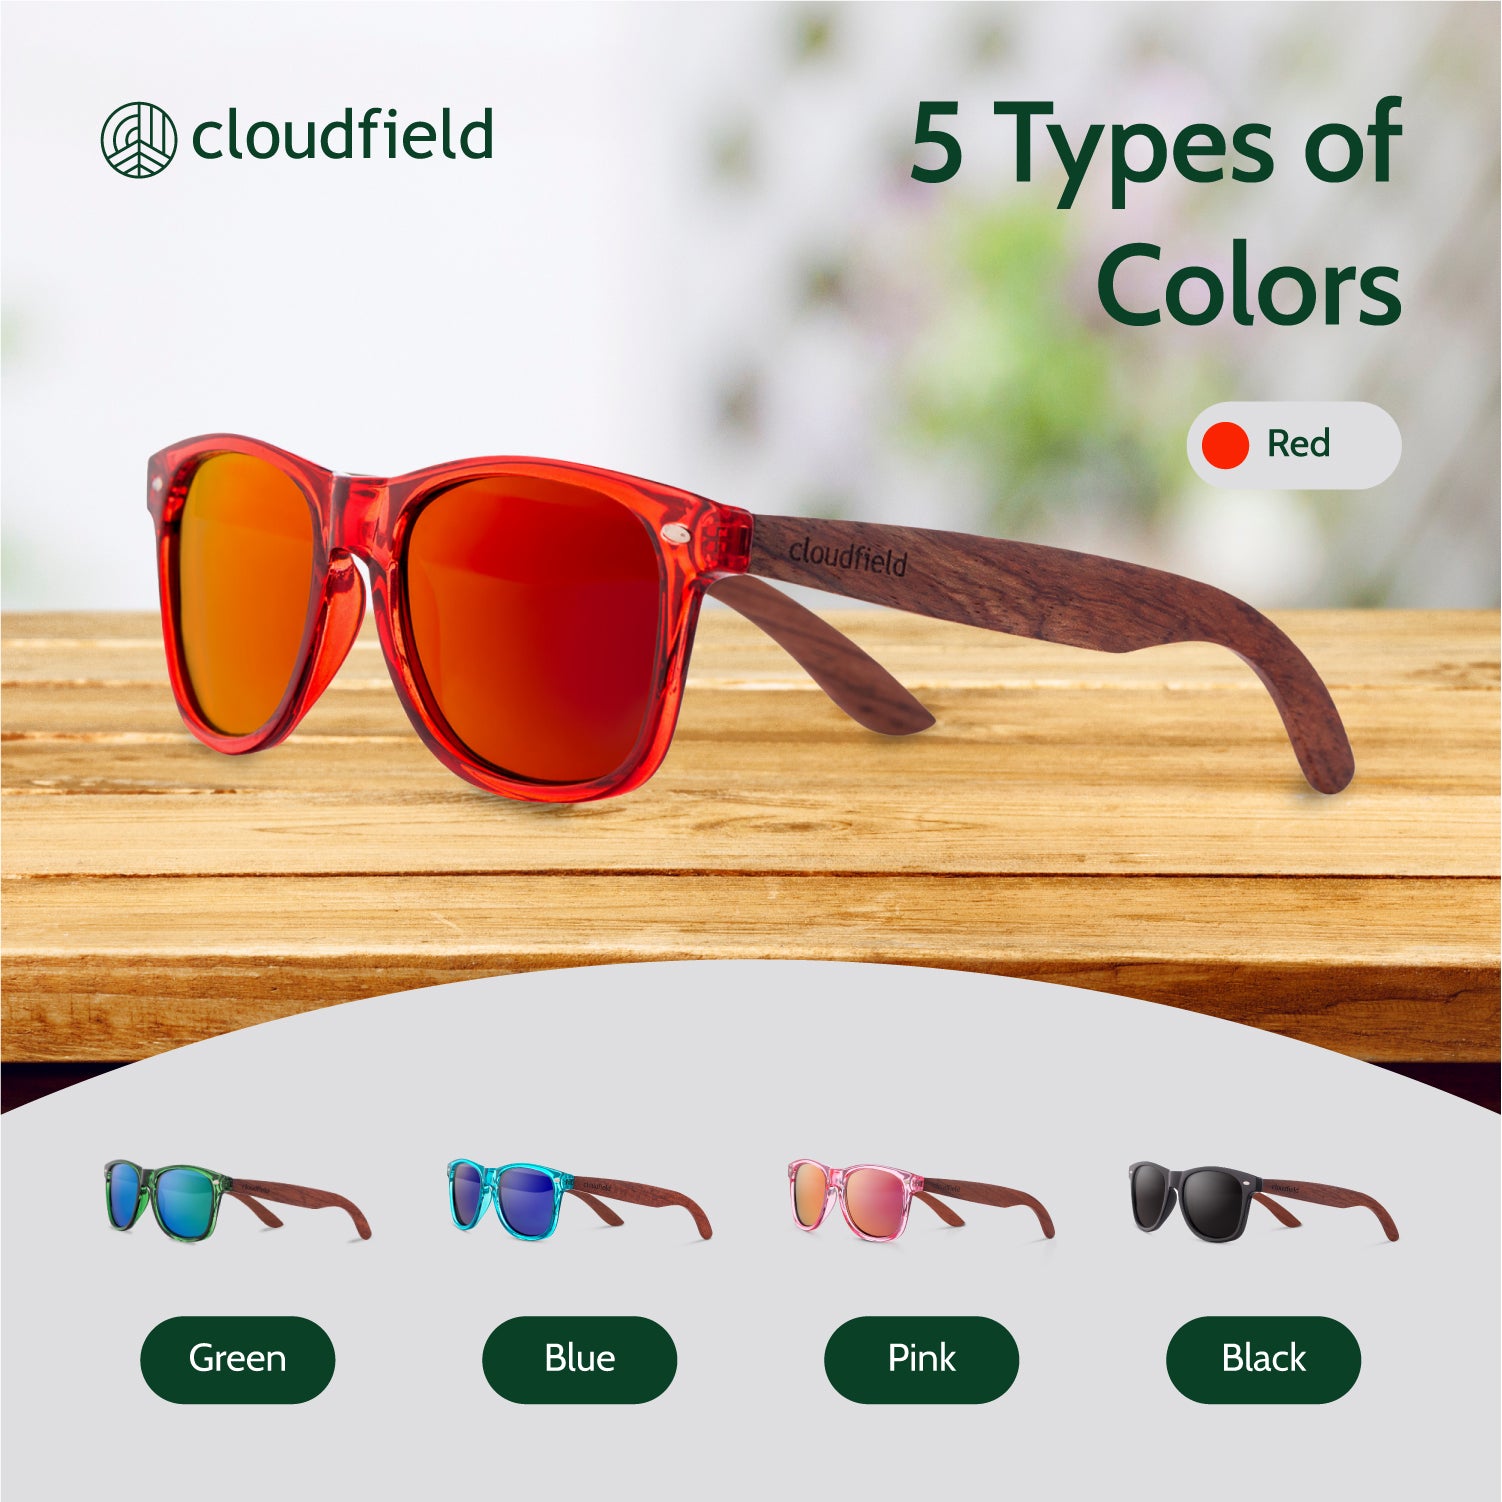 cloudfield red polarized glasses